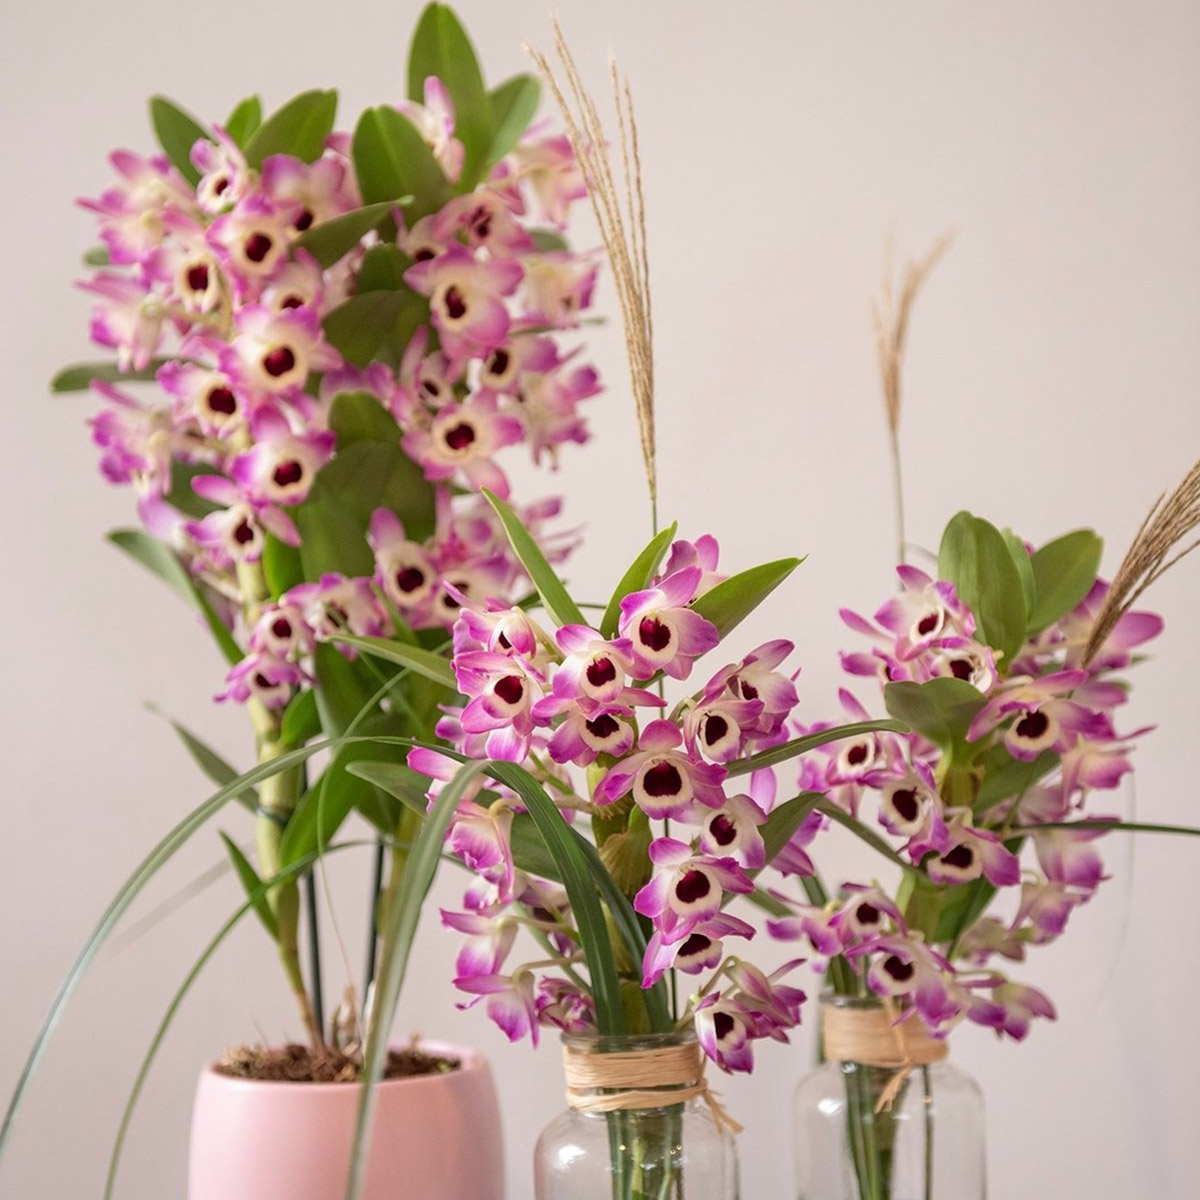 raise-the-bar-with-quality-dendrobium-nobile-pot-plants-featured